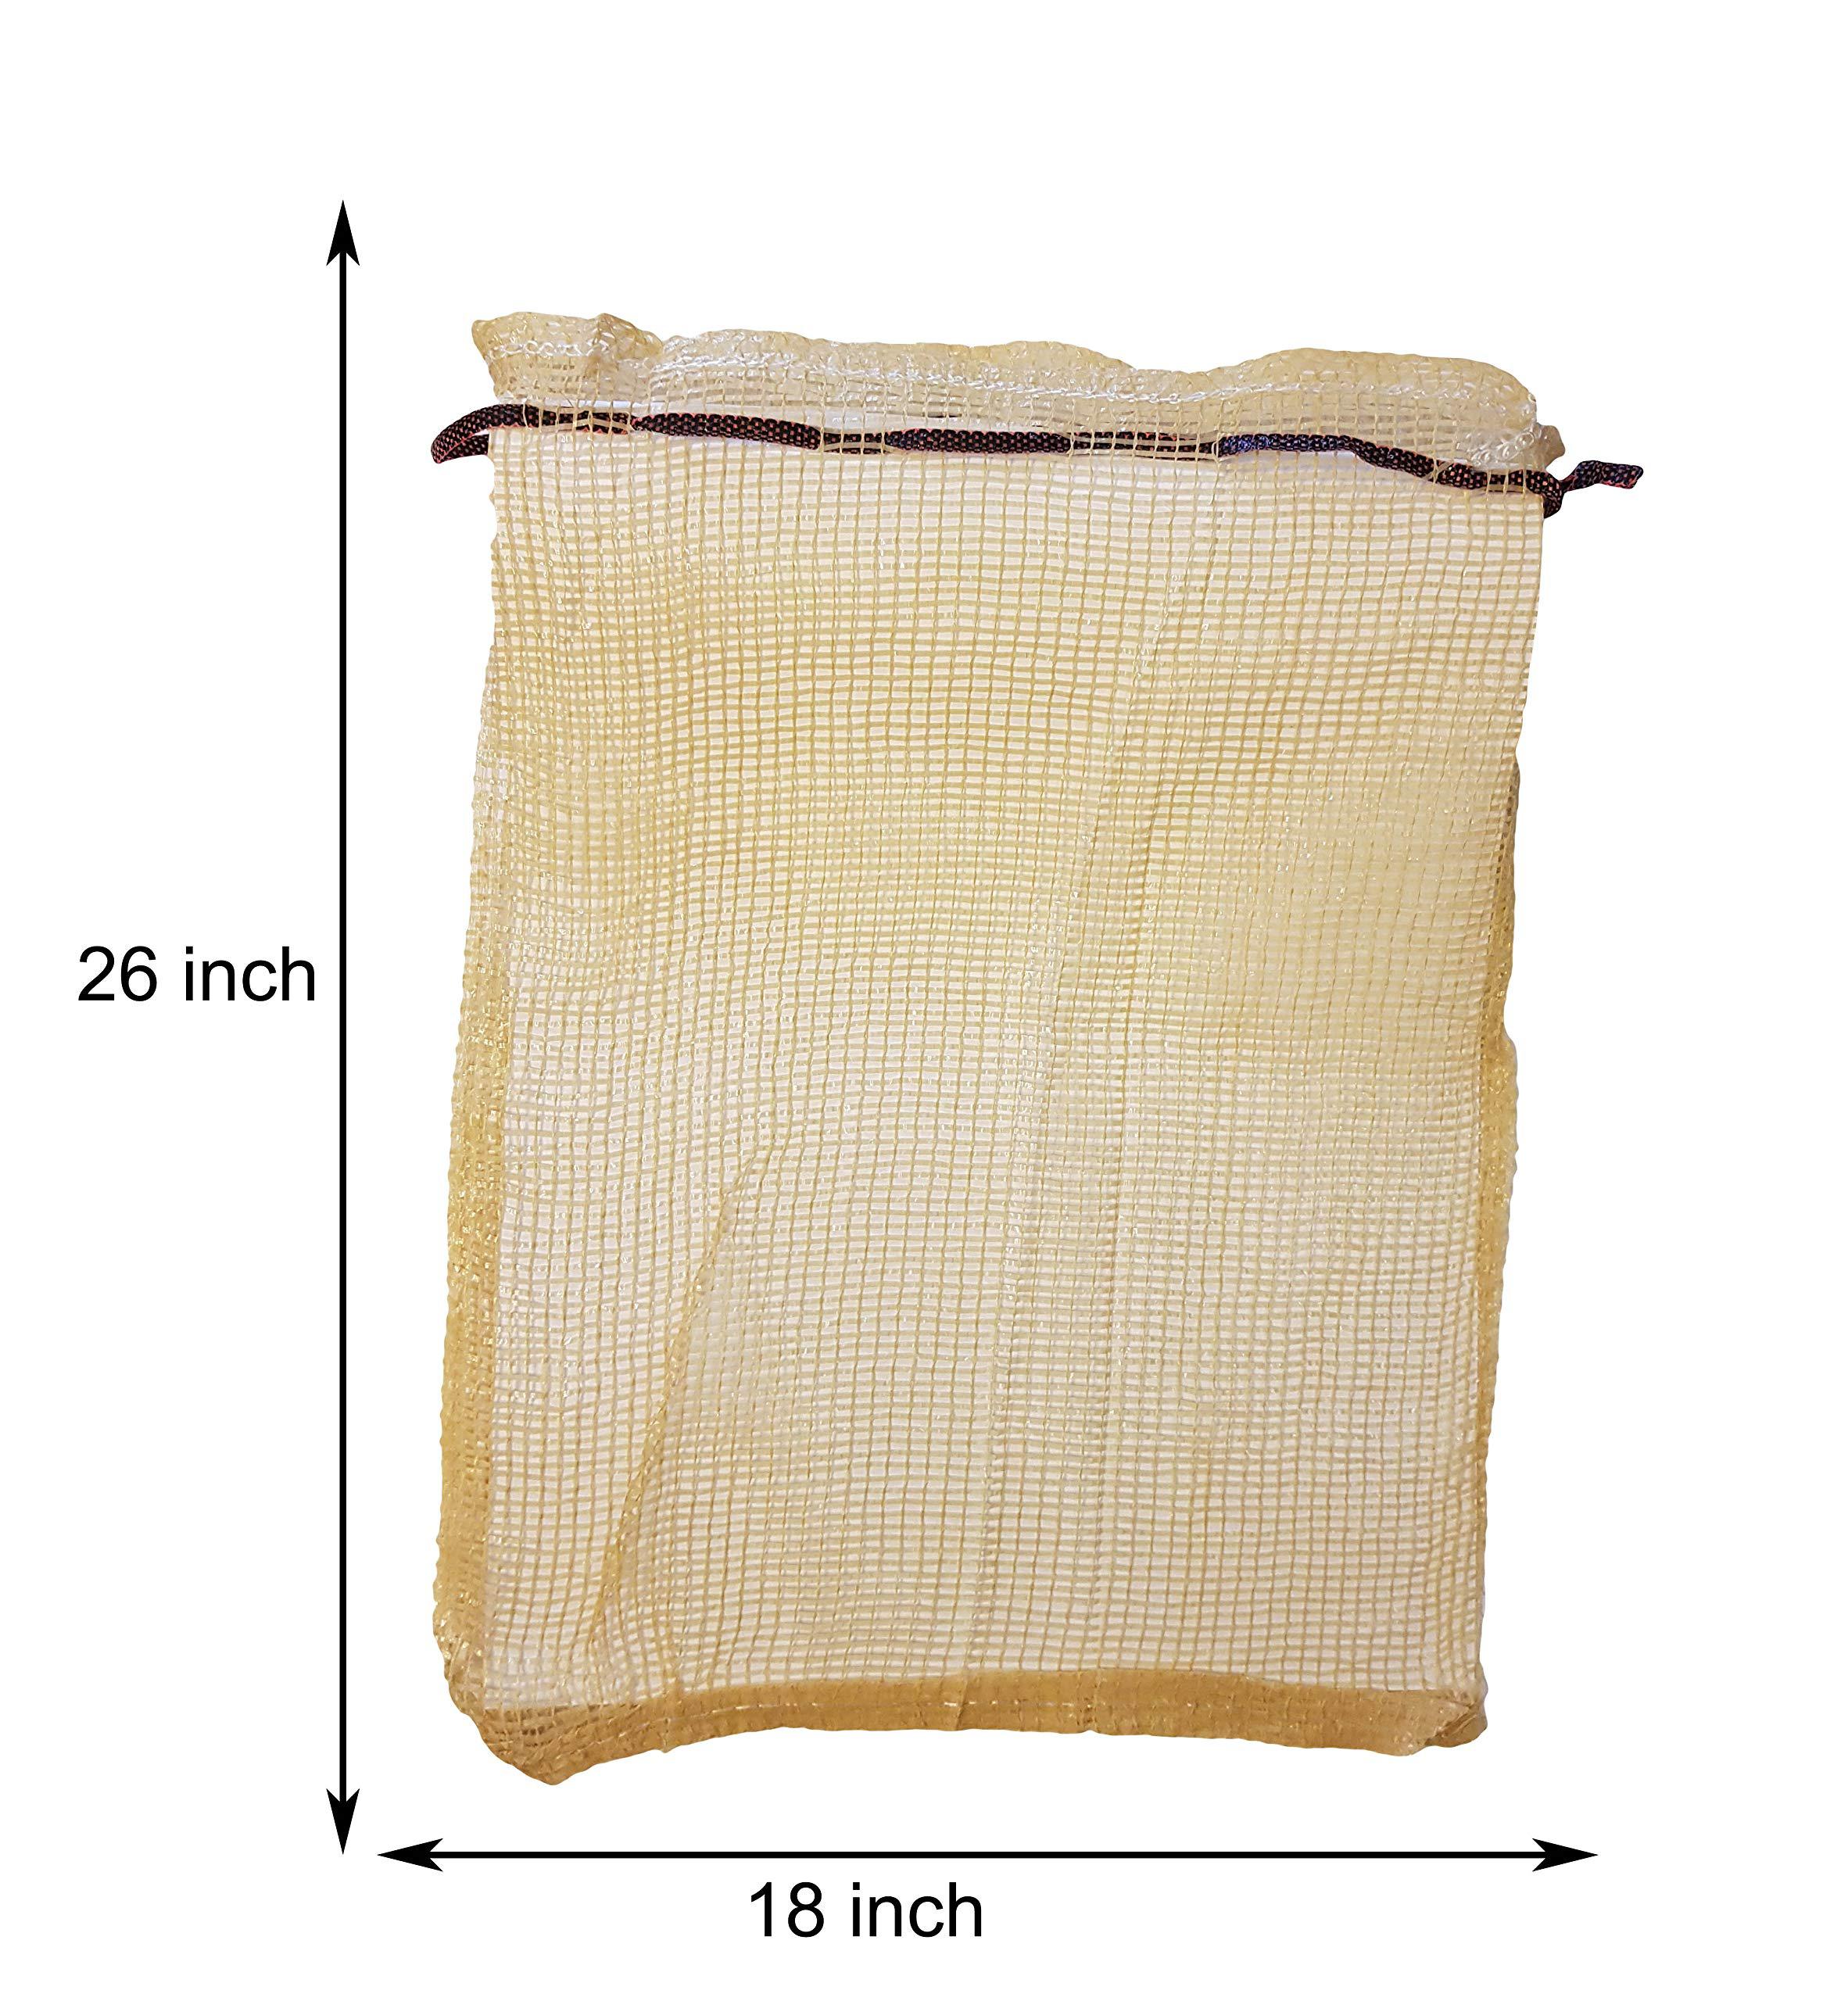 NNZ shoplineon reusable vegetable storage bags 30 lbs - heavy duty grocery mesh sacks holds up to 30 lbs - breathable produce cit